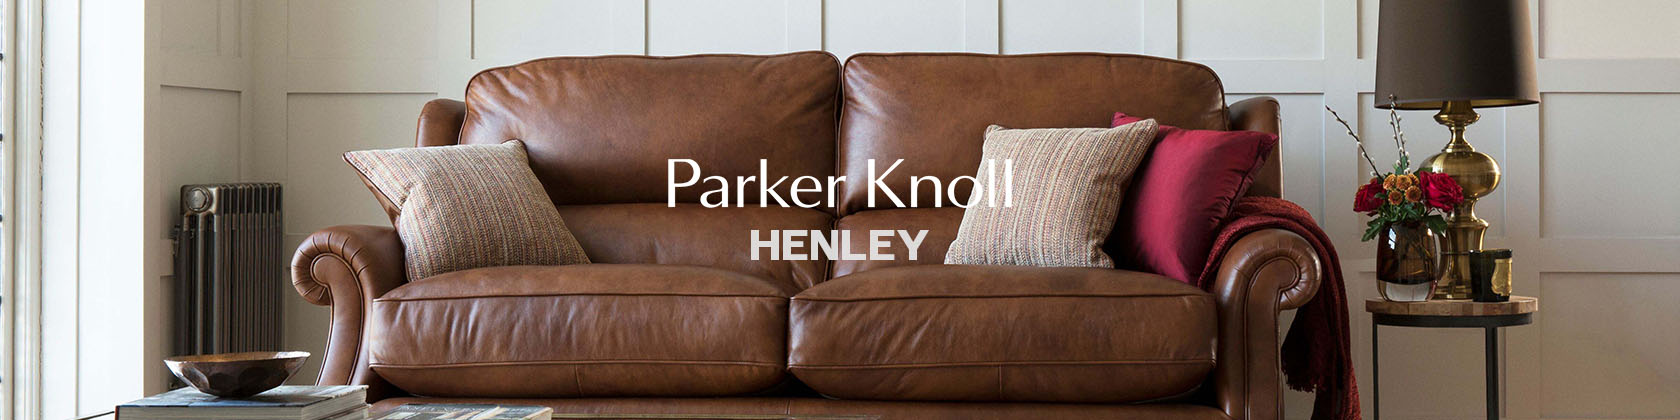 parker-knoll-henley-category-banner